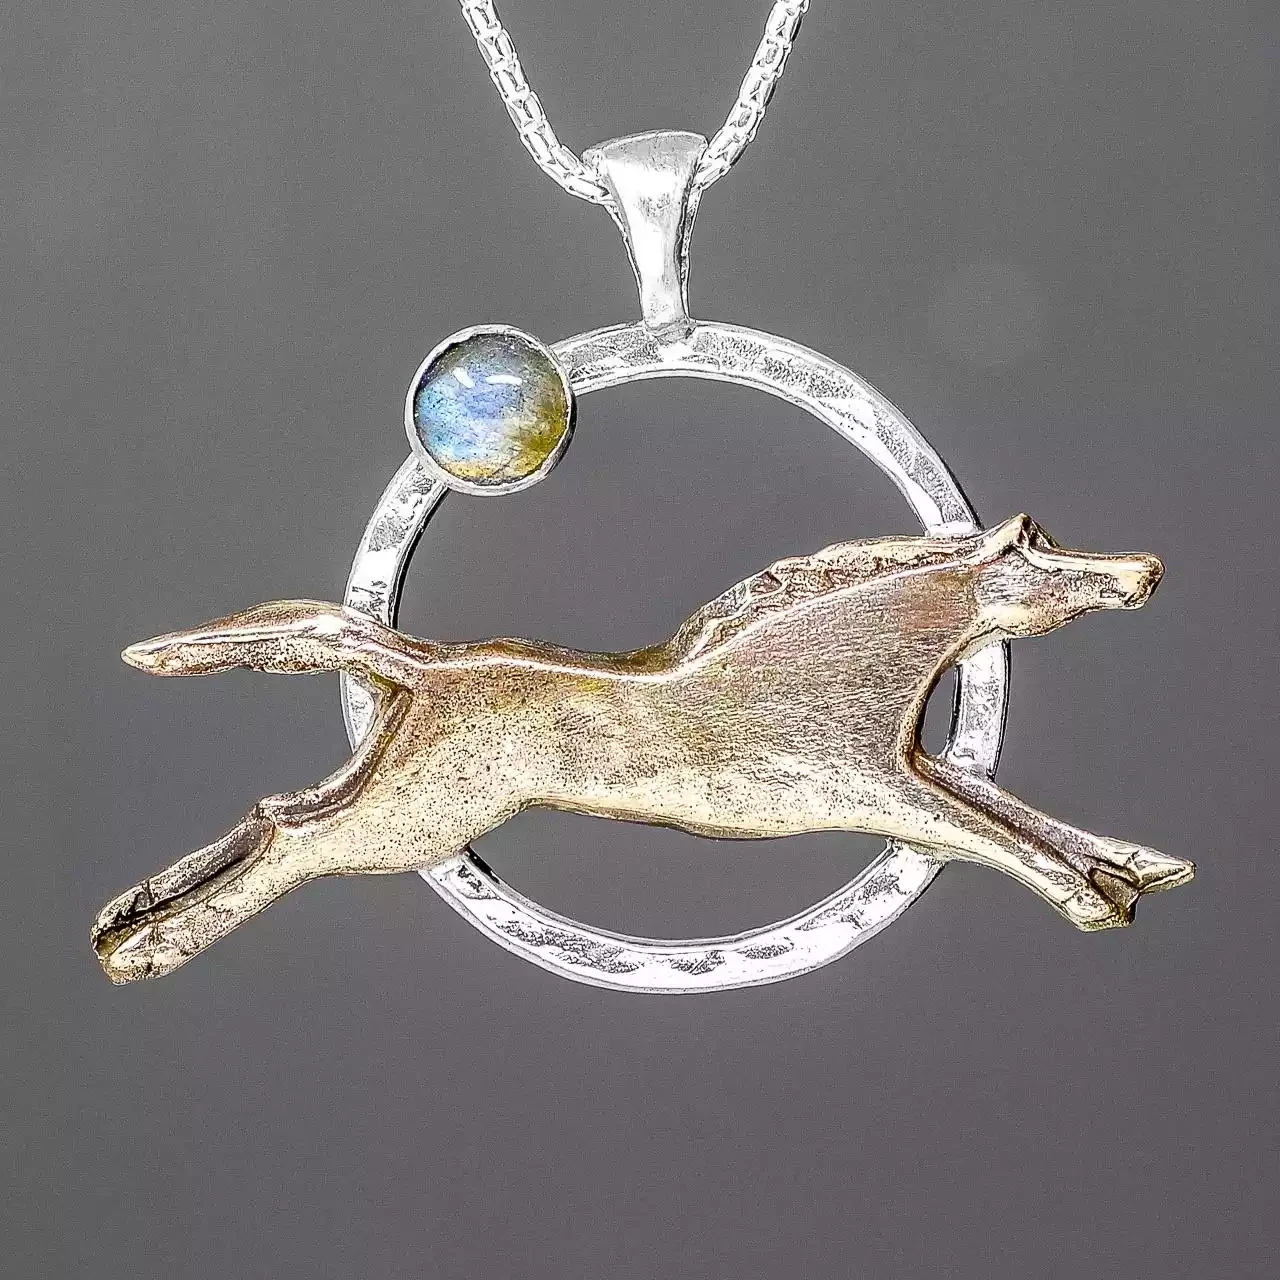 Midnight Moon Gallop Horse Silver and Bronze Circle Pendant by Xuella Arnold